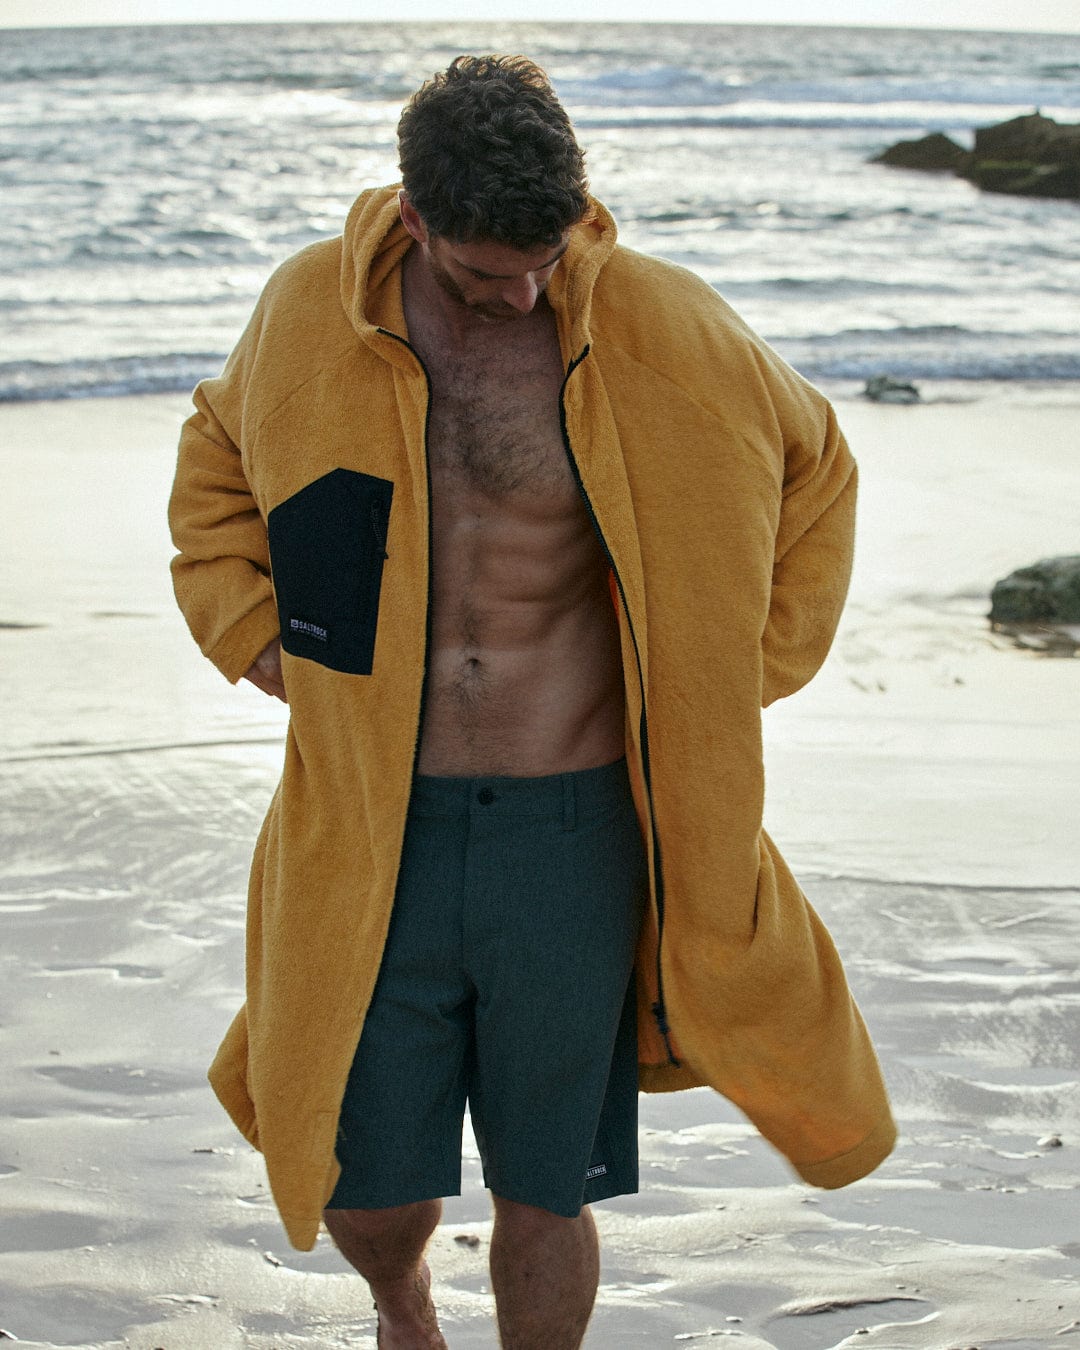 A man in a Saltrock 3 in 1 Recycled Four Seasons Changing Robe - Black/Yellow and navy shorts stands on a beach, looking down with a thoughtful expression.